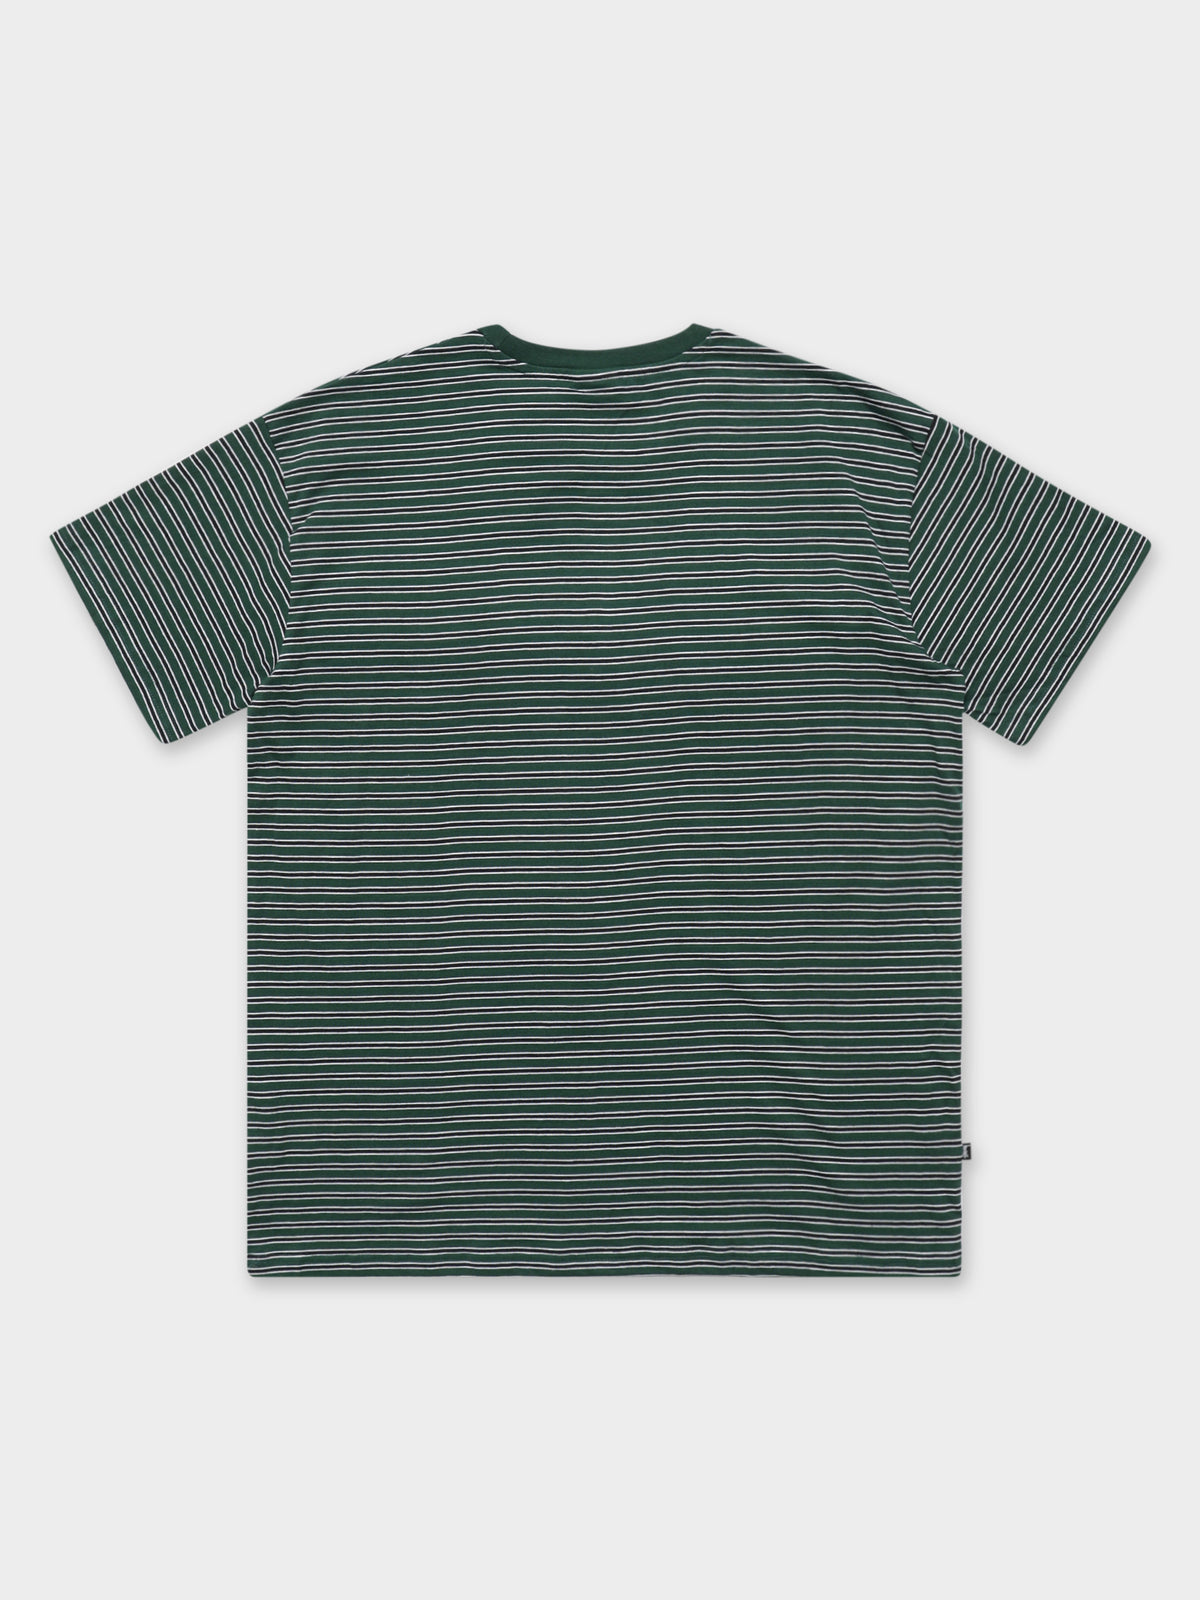 Designs Yarn Dyed T-Shirt in Forest